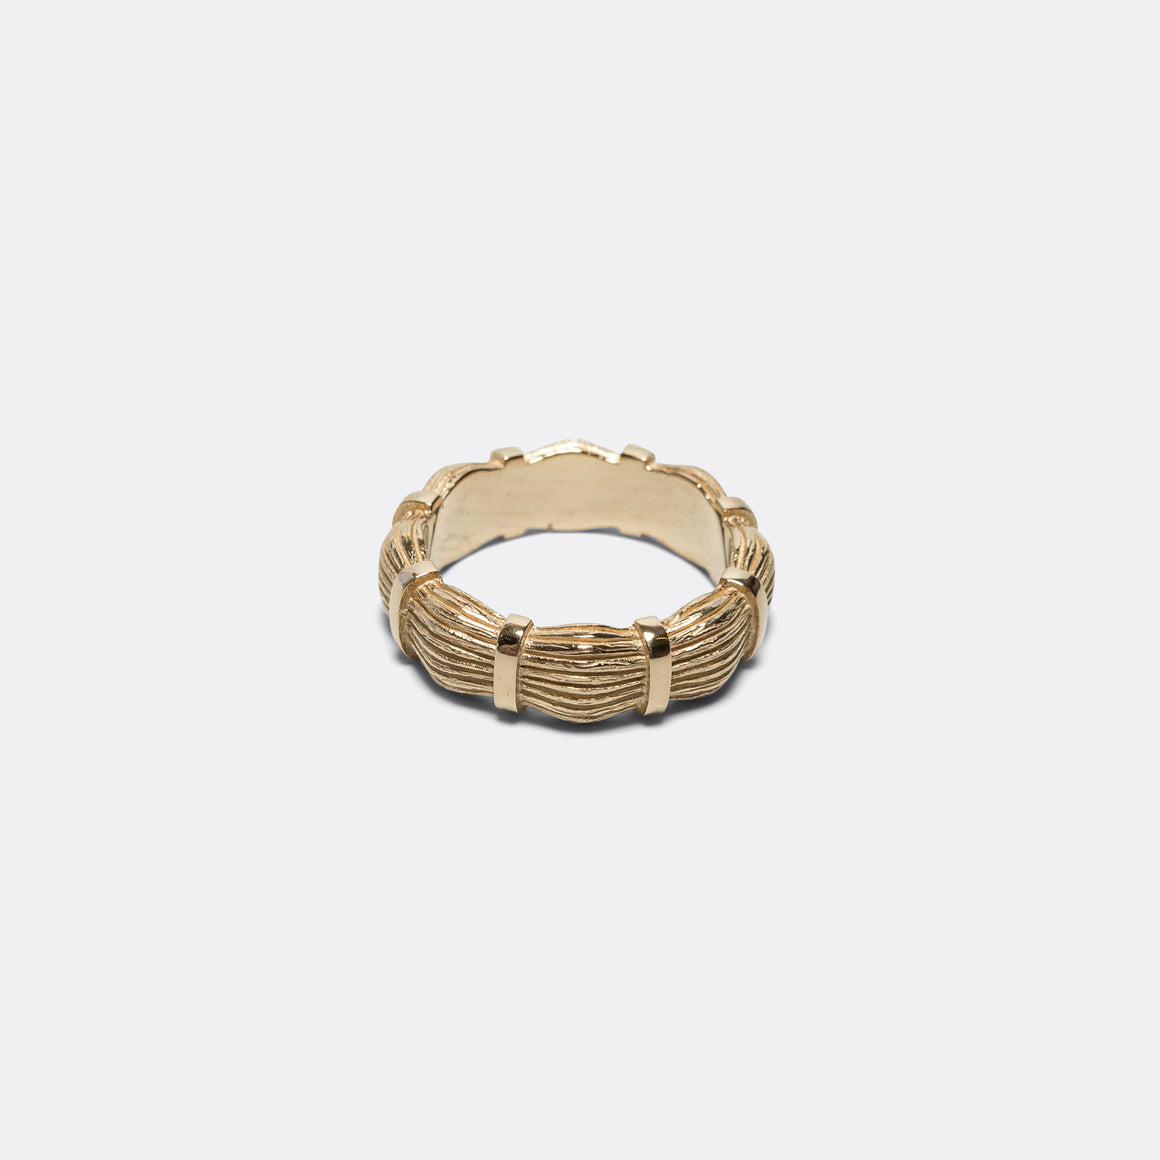 Bound Willow Band Ring - 9K Gold